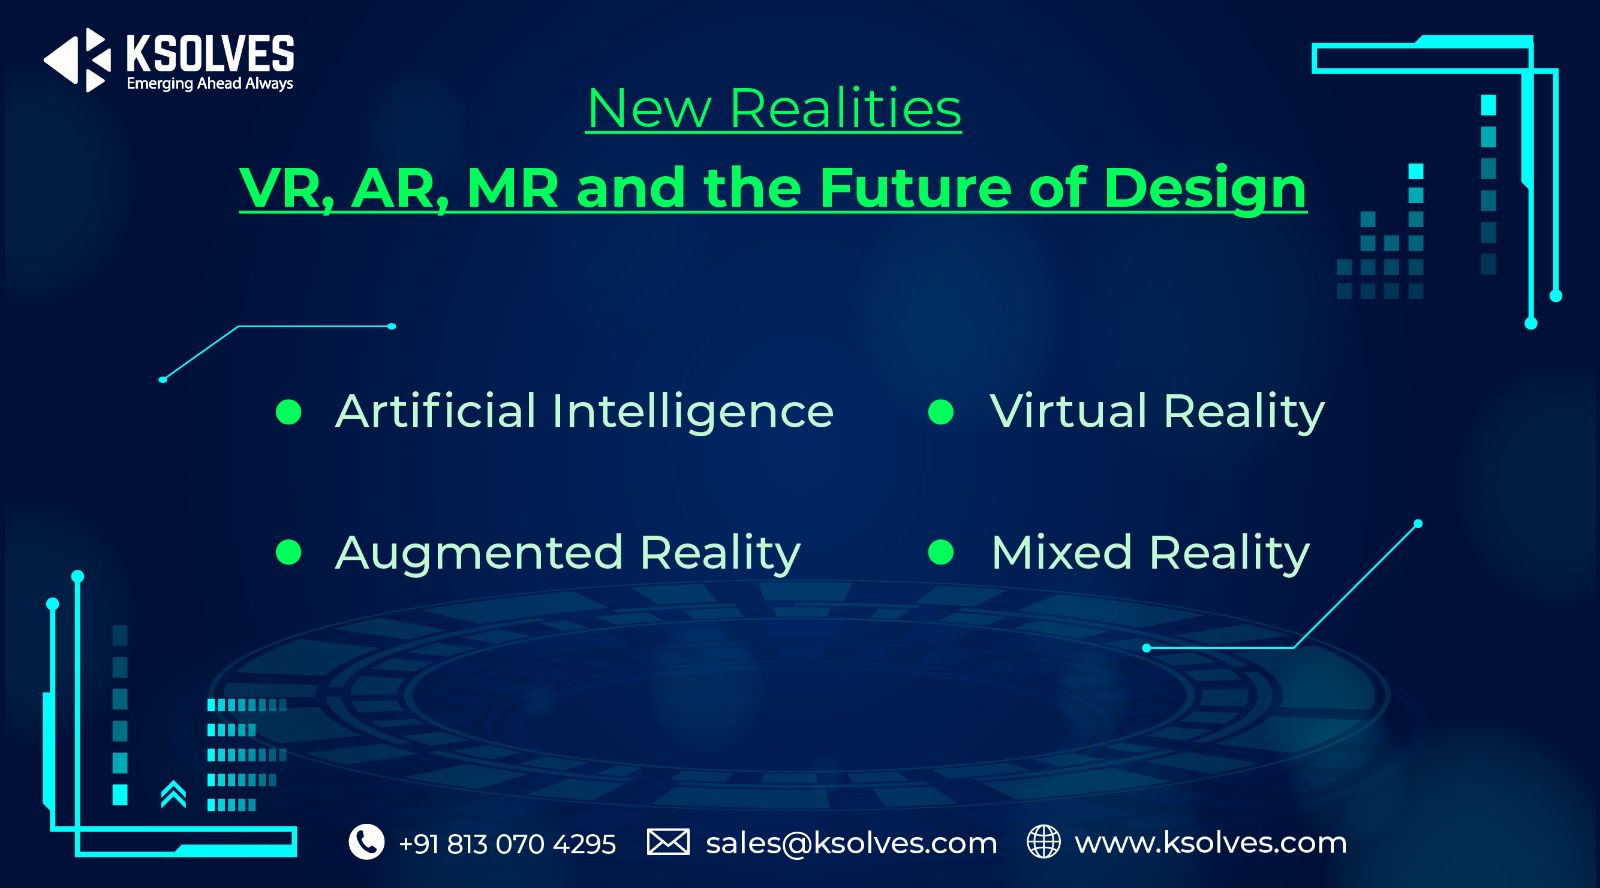 New Realities: VR, AR, MR and the Future of Design